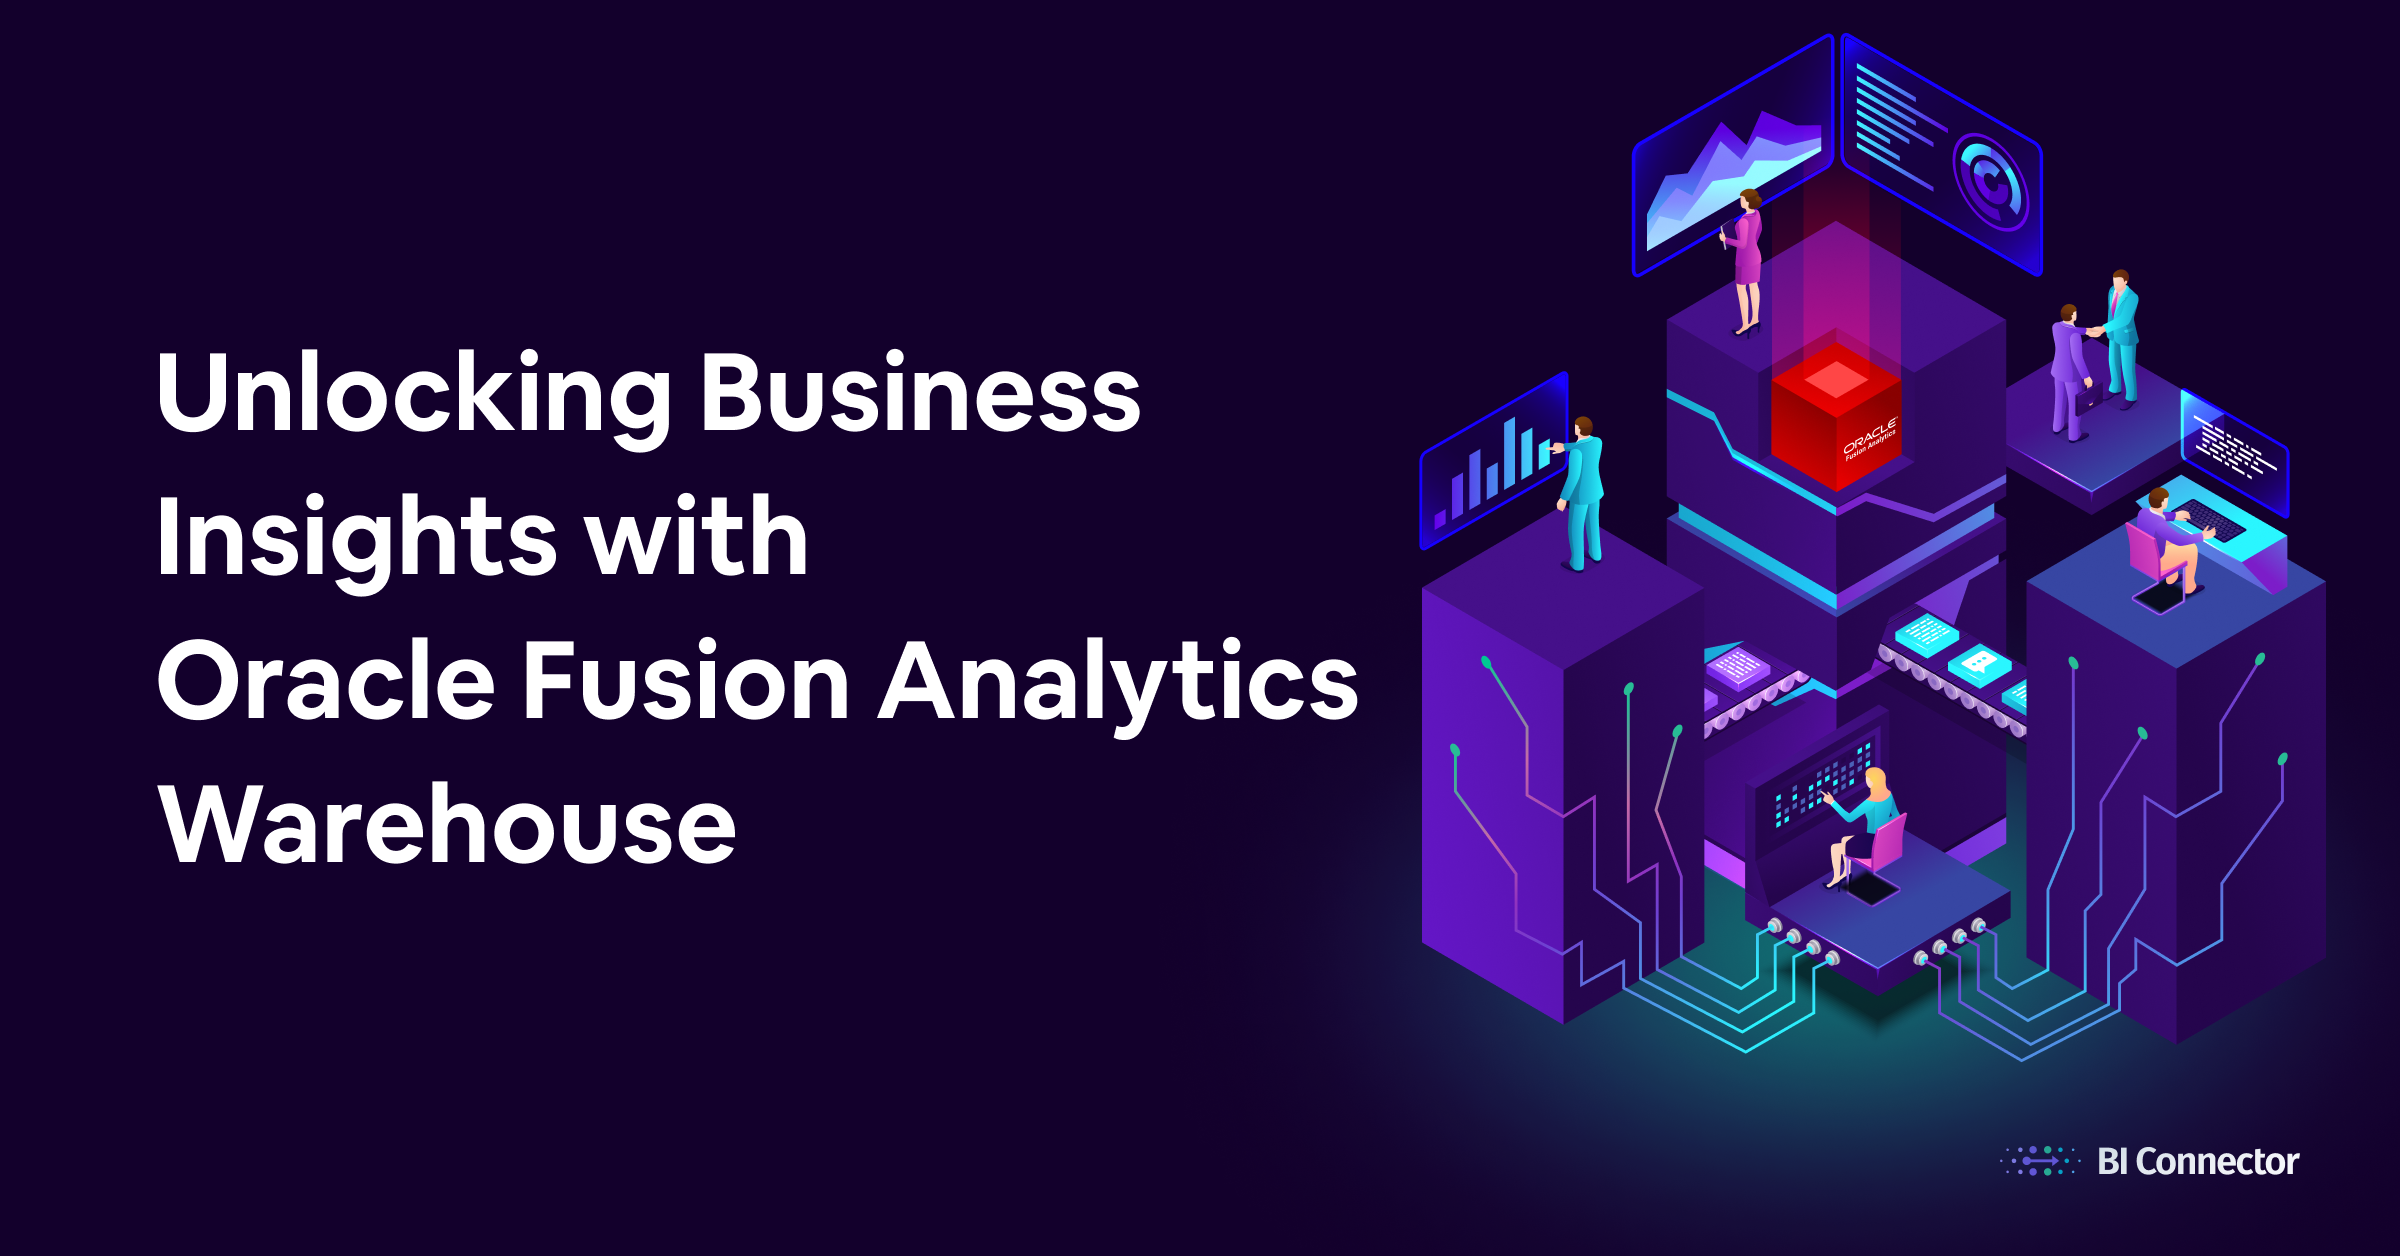 Unlocking Business Insights with Oracle Fusion Analytics Warehouse